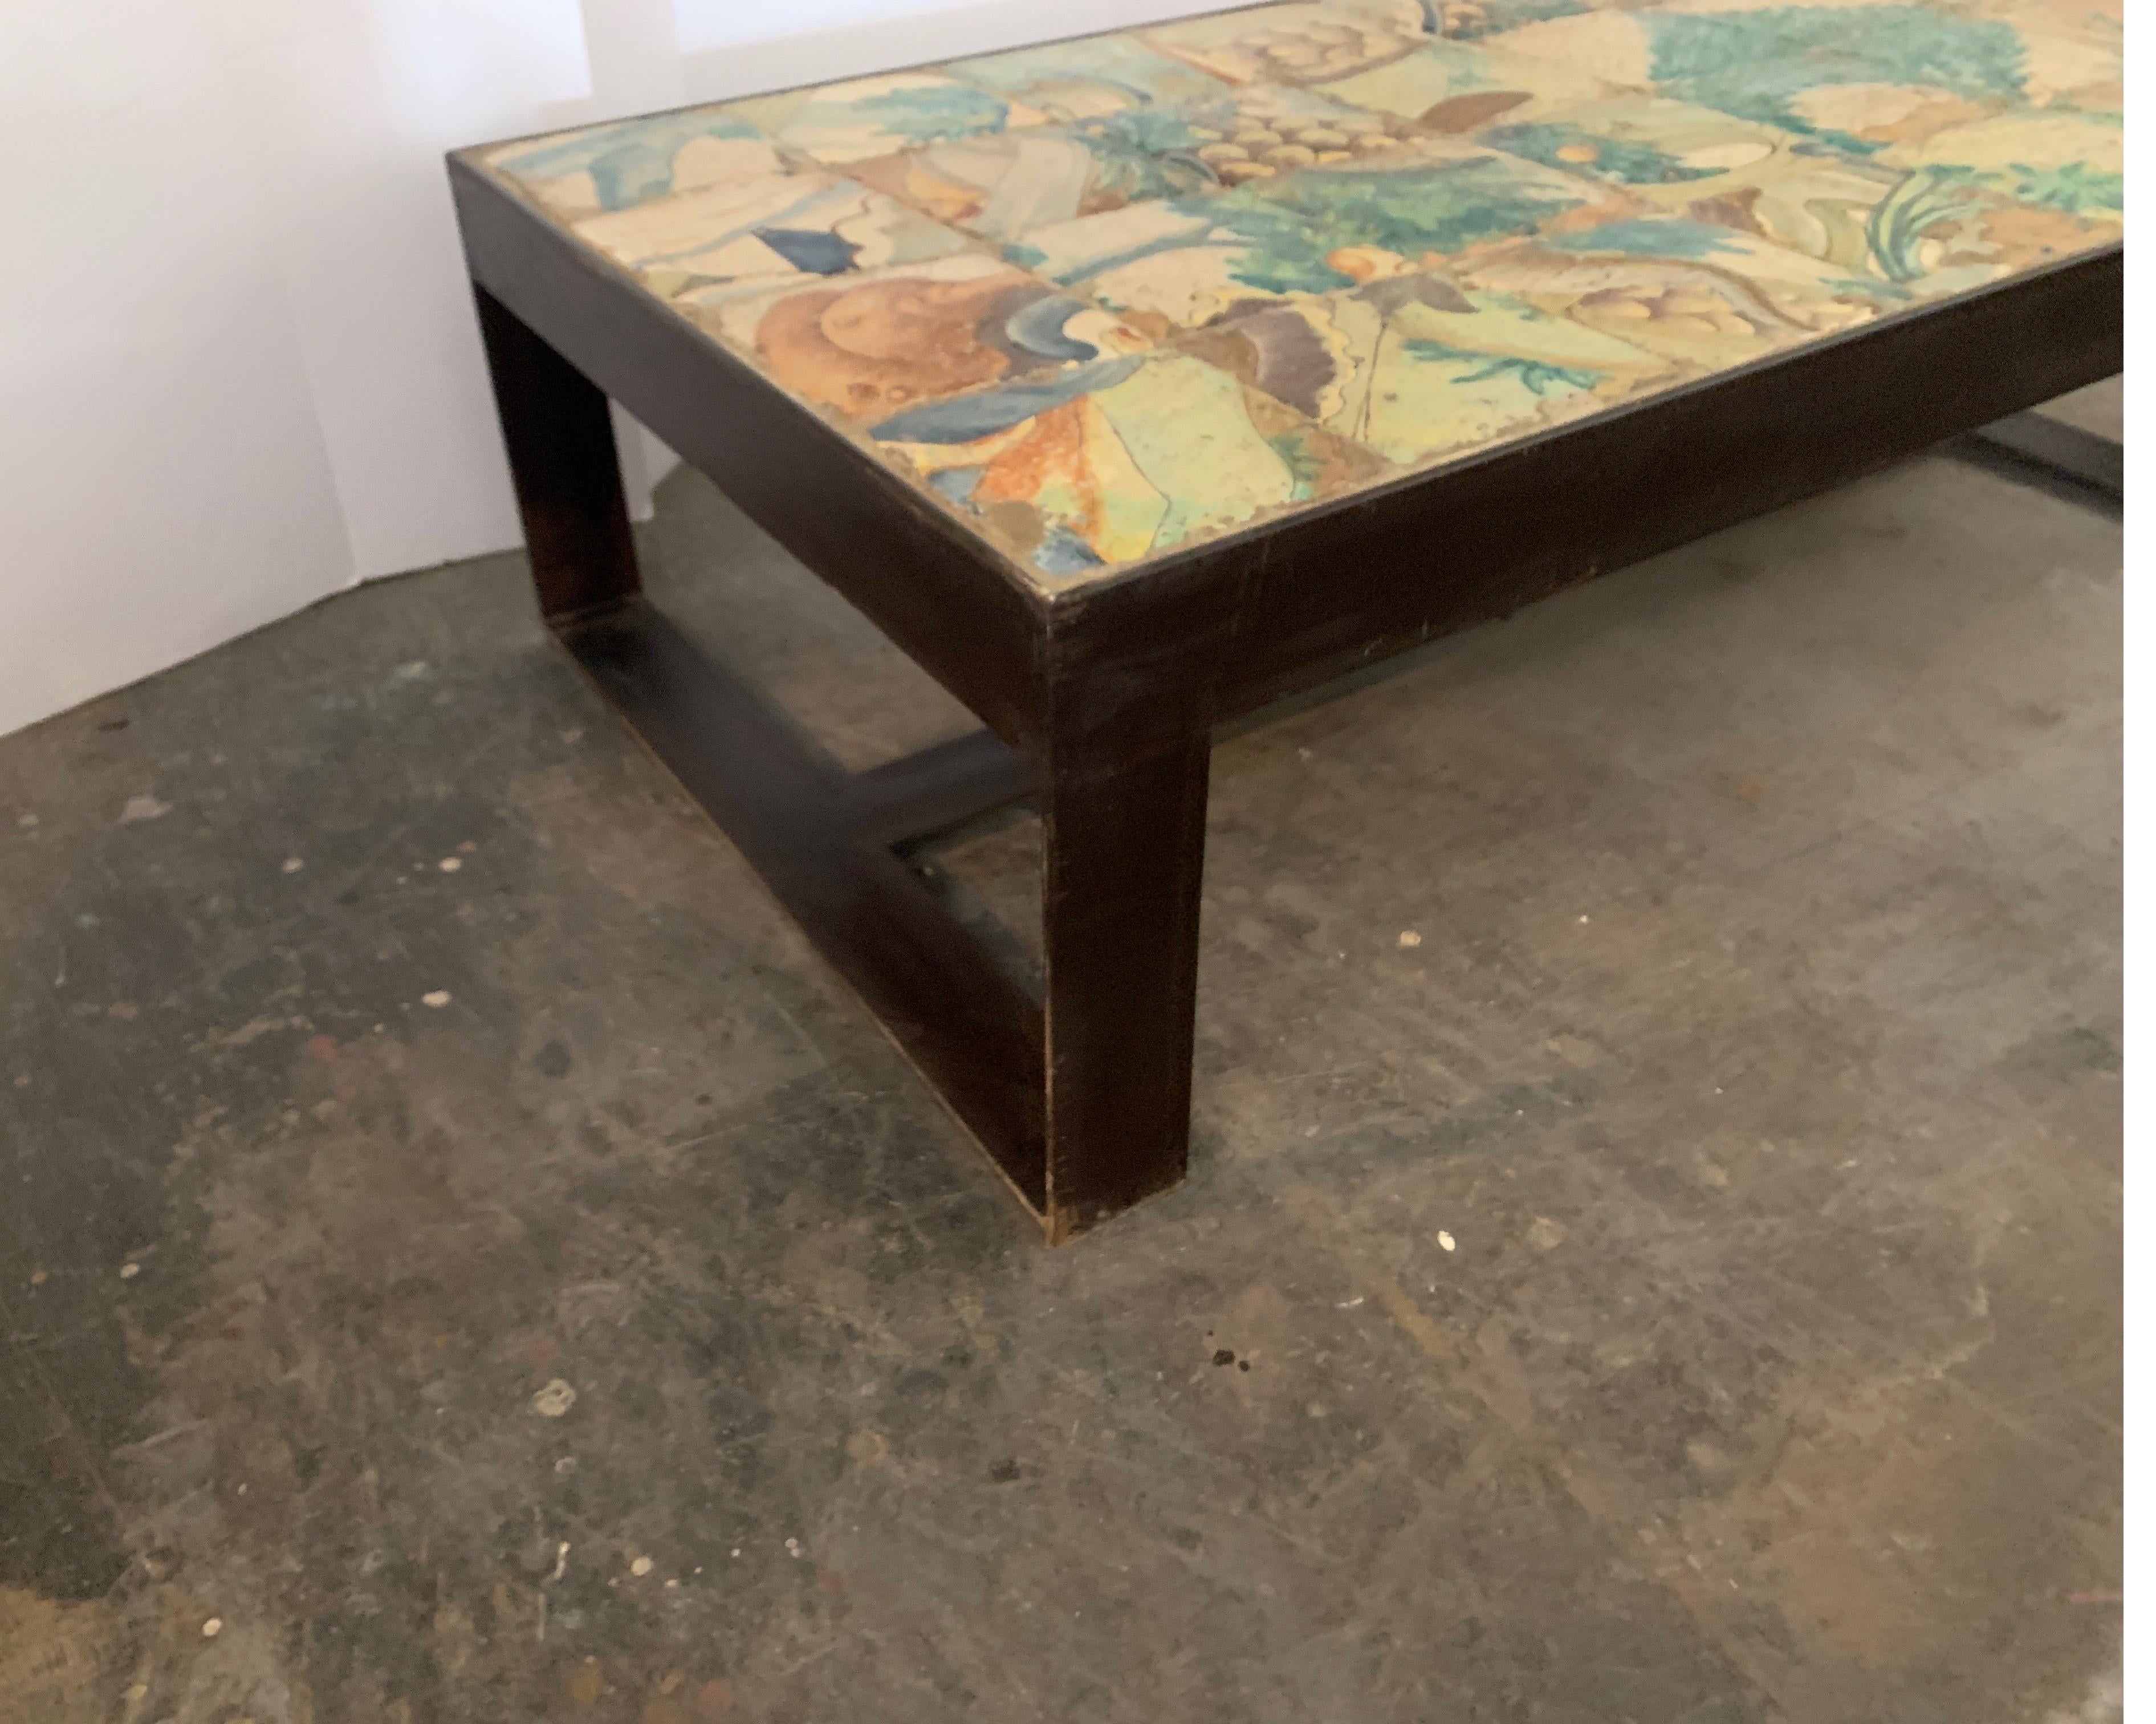 Contemporary Antica Collection Creation Iron Table with 17th Century Portuguese Tiles Inset